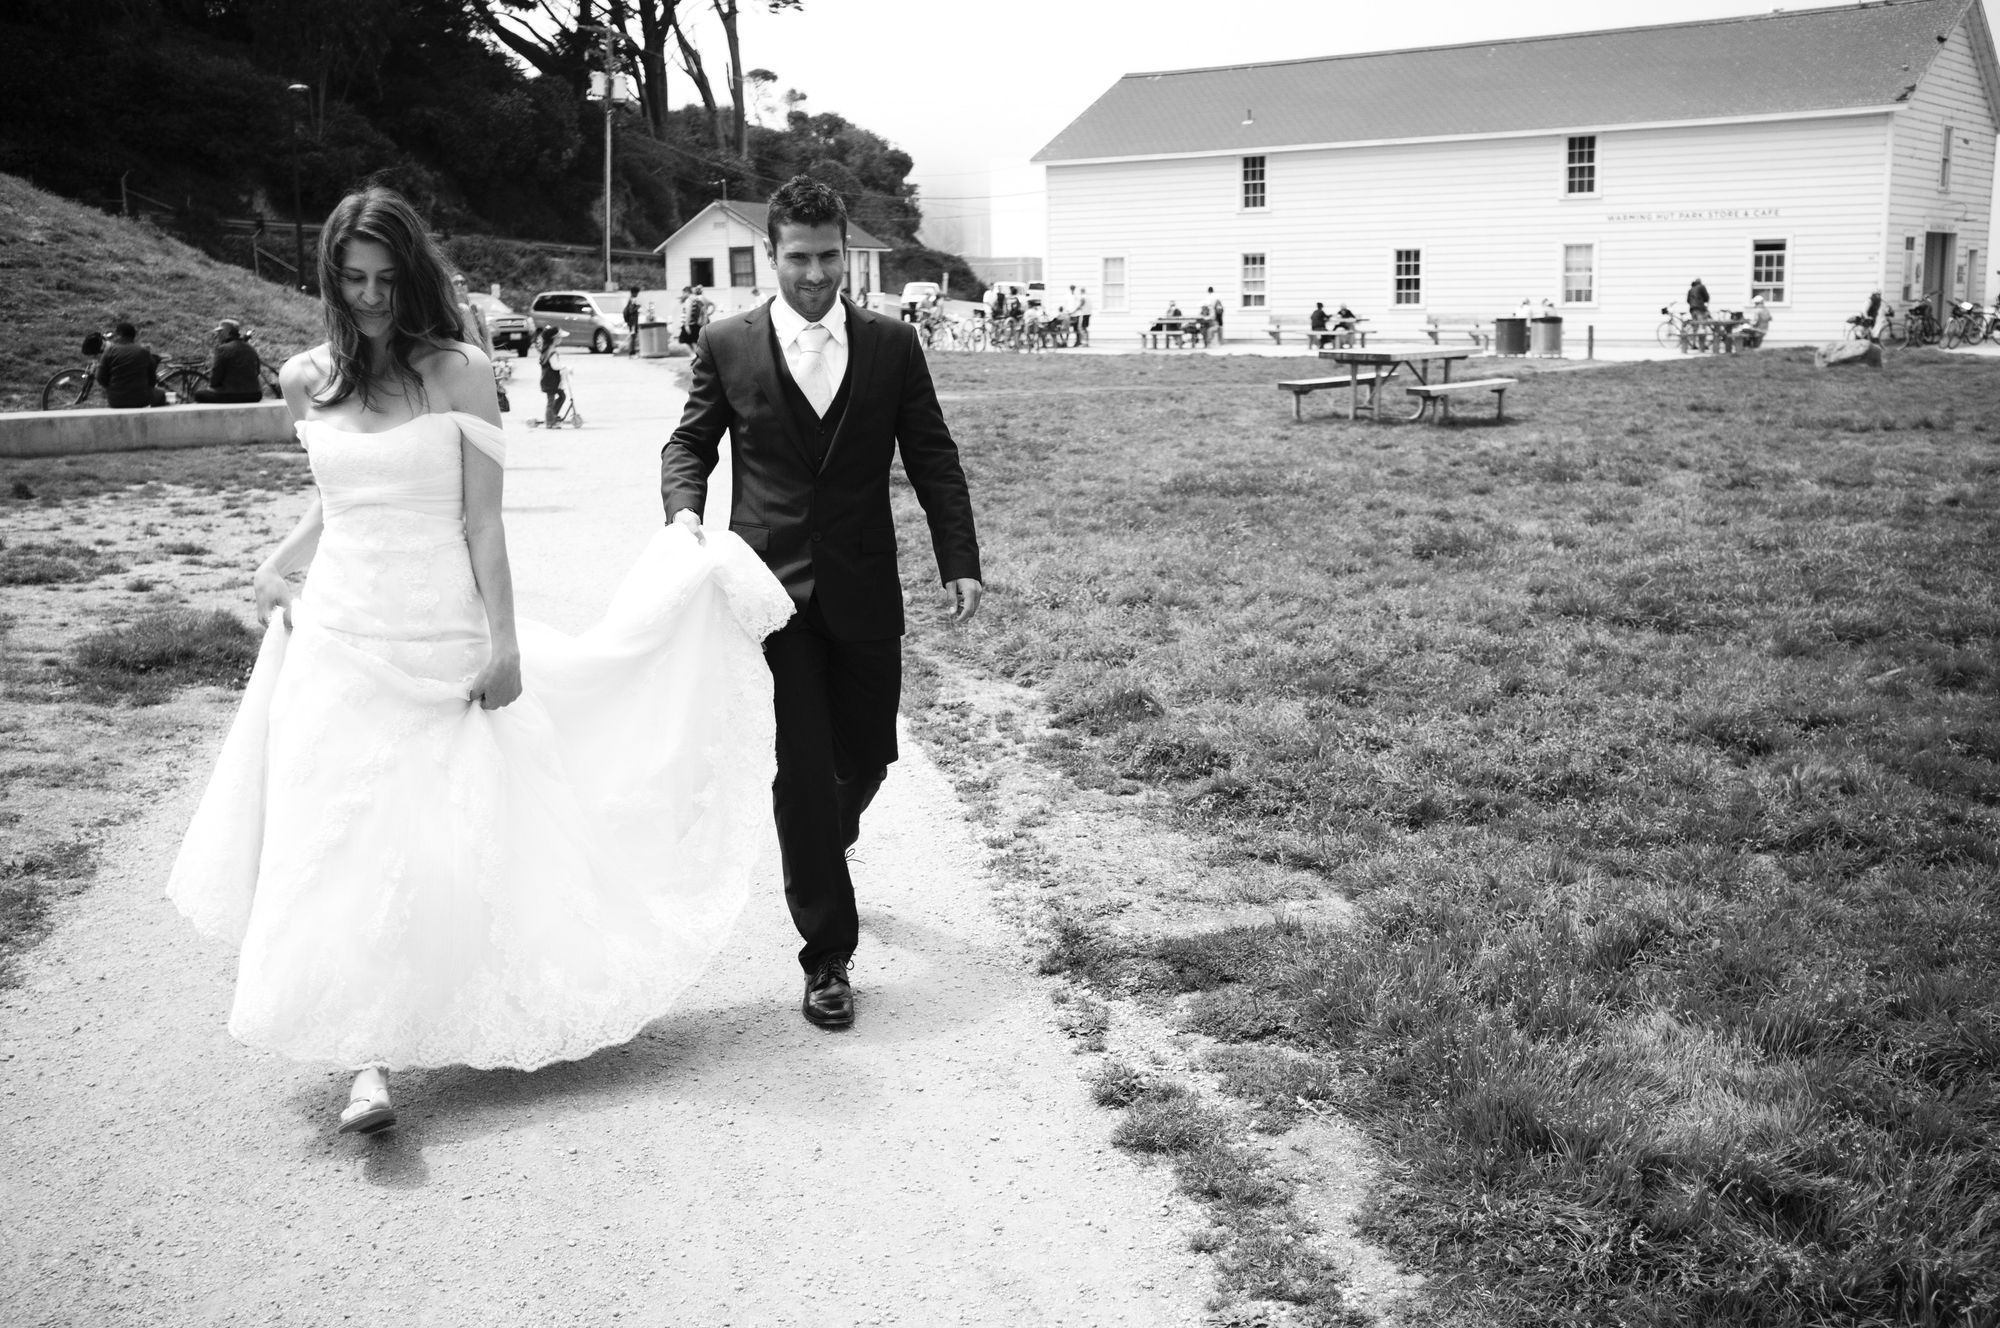 Photo: A couple on their wedding day. The person on the left is the author, female presenting, long brown hair, long white dress with a lace skirt and off-the-shoulder bodice; the man on the right is holding the train as they walk together down a dirt path beset by grass with some picnic tables and plain off-white buildings in the background. The groom on the right is wearing a black suit with a white shirt and cream-colored tie with shiny black shoes. 